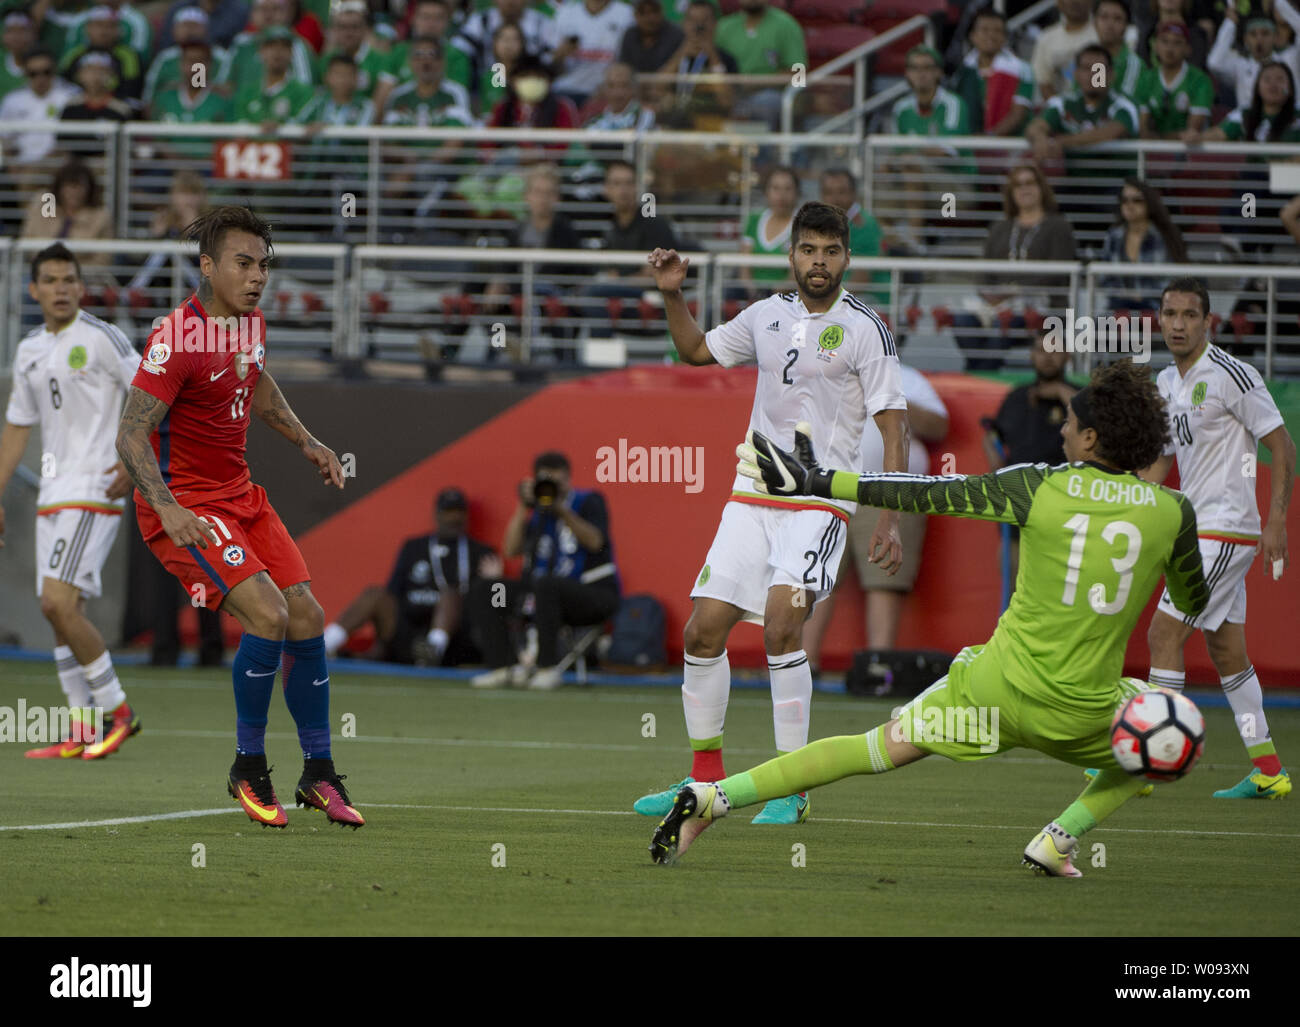 Chile's Eduardo Vargas (L) puts the ball behind Mexico's goalie Guillermo Ochoa (13) for Chile's second goal in the first half at COPA America Centenario quarter-finals at Levi's Stadium in Santa Clara, California on June 18,  2016. Chile annihilated Mexico 7-0.   Photo by Terry Schmitt/UPI Stock Photo